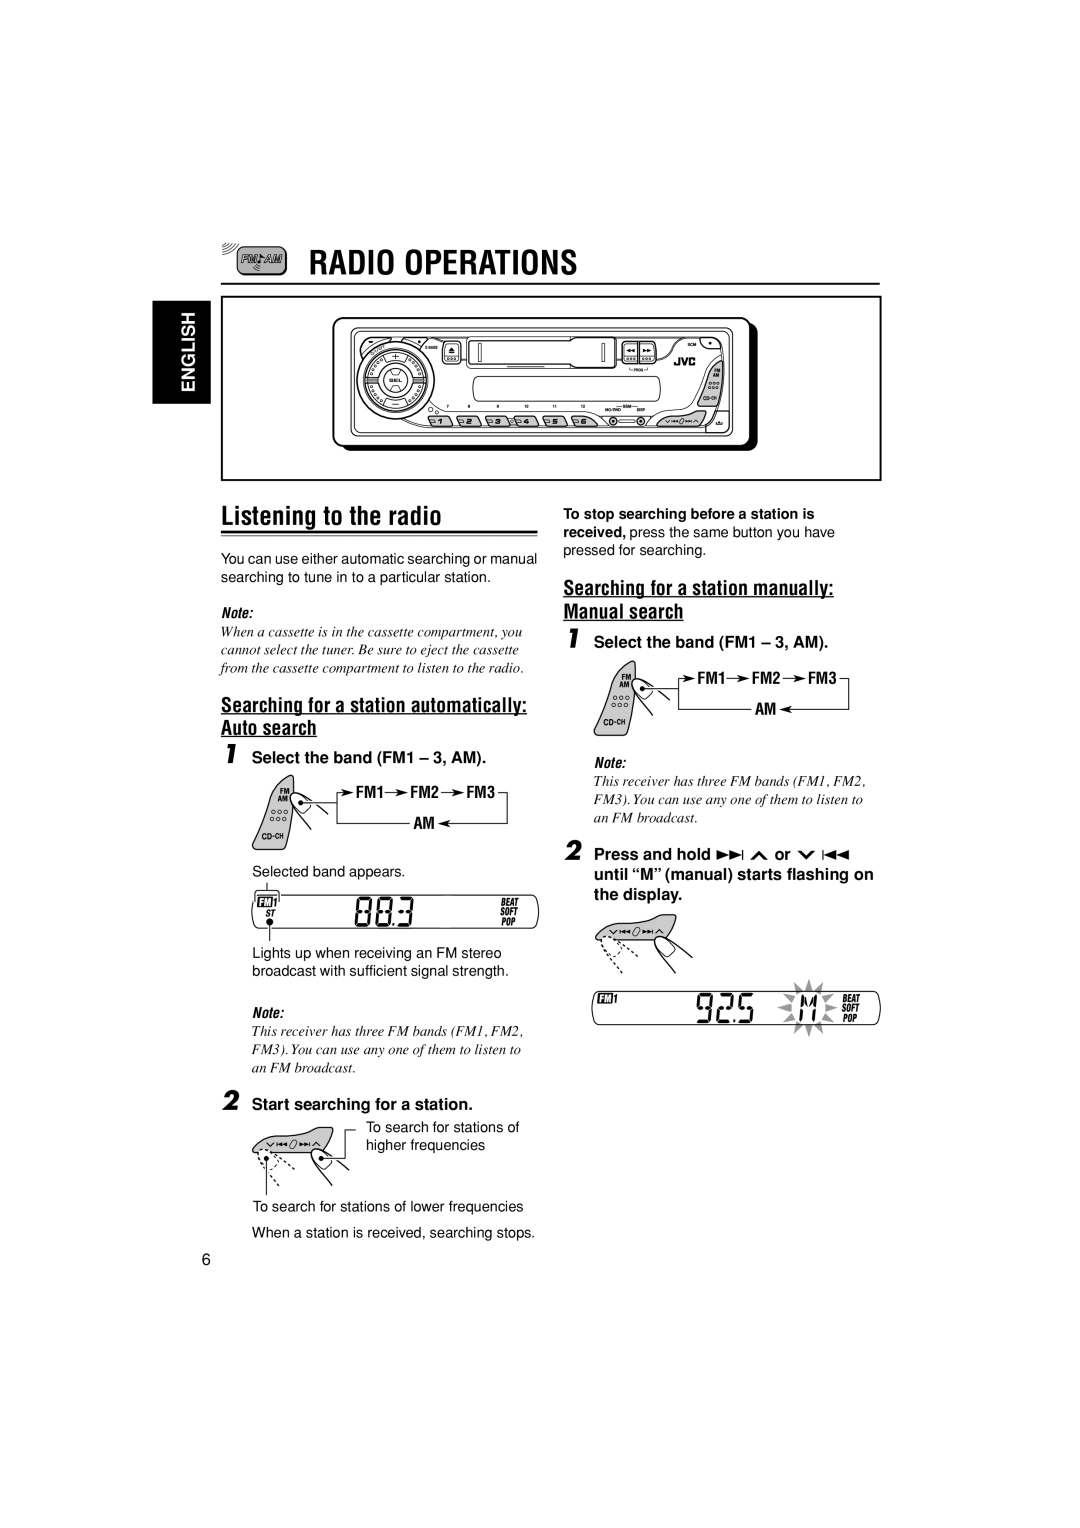 JVC KS-FX385 manual Radio Operations, Listening to the radio, Searching for a station automatically Auto search, English 